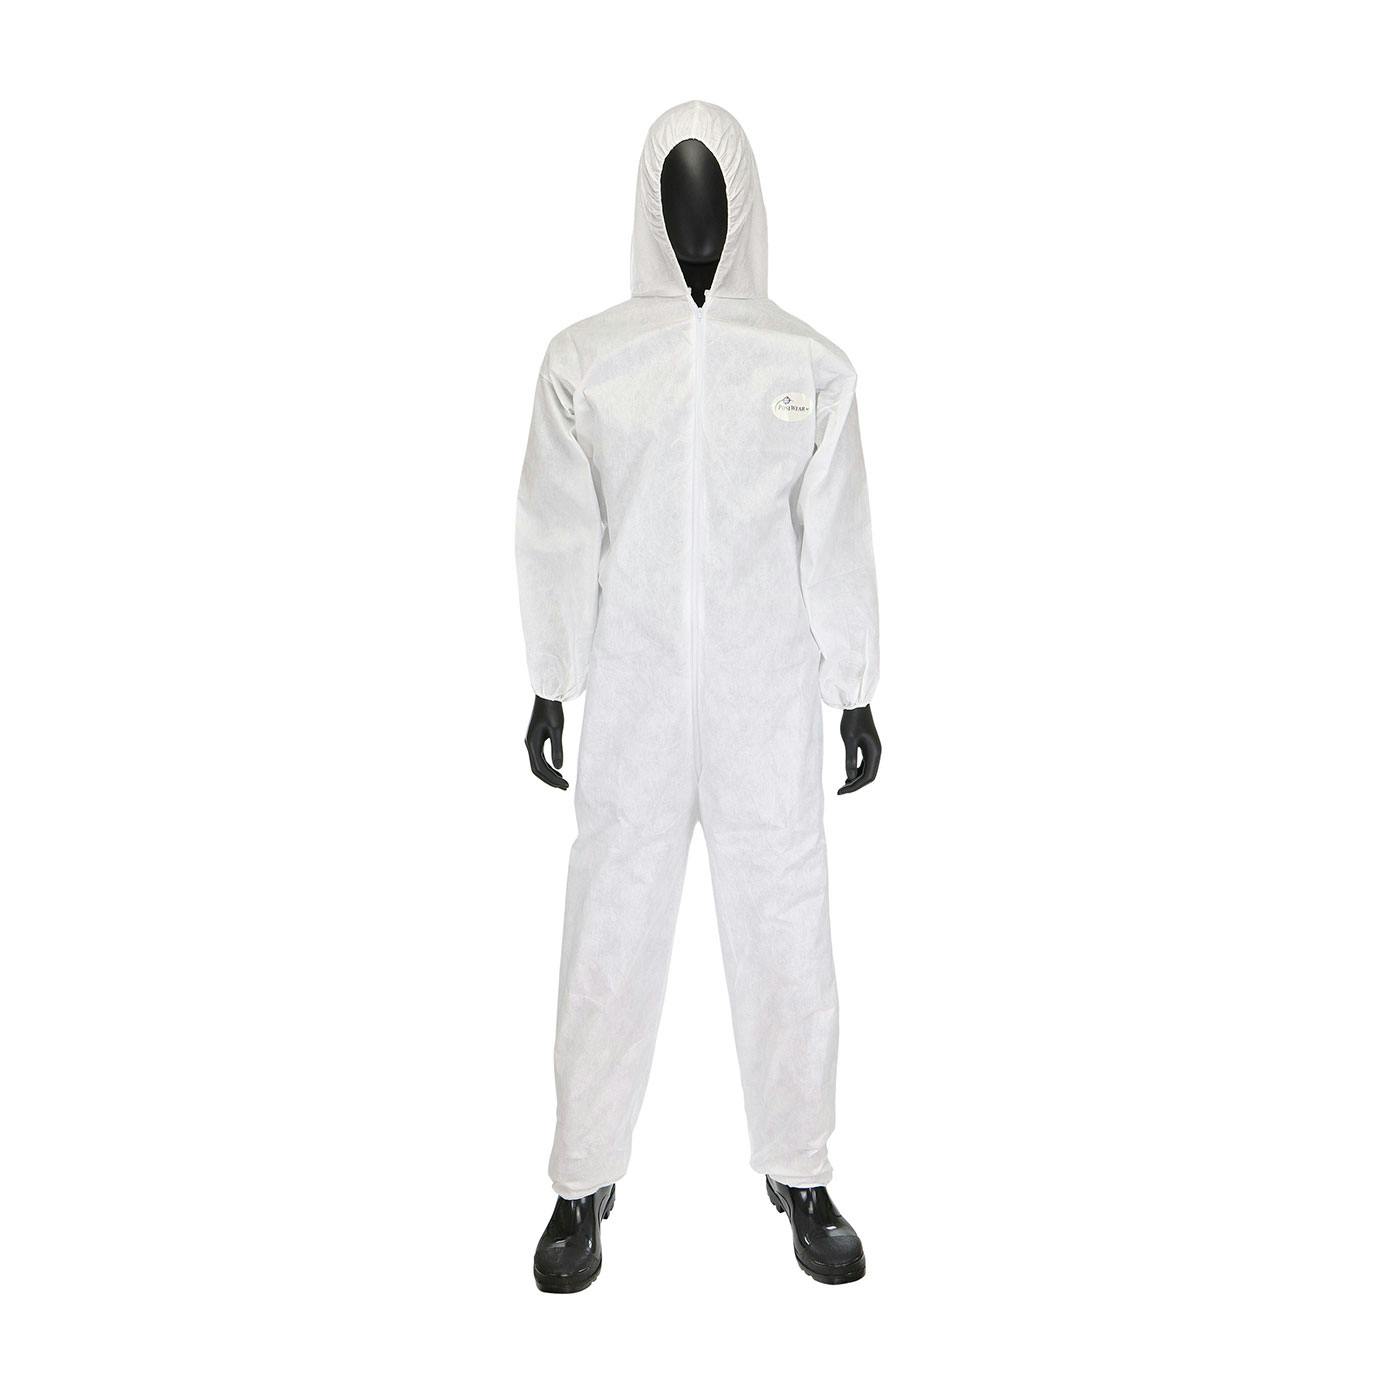 PosiWear M3 Coverall with Hood, Elastic Wrists & Ankles 50 gsm, White (C3806)_1